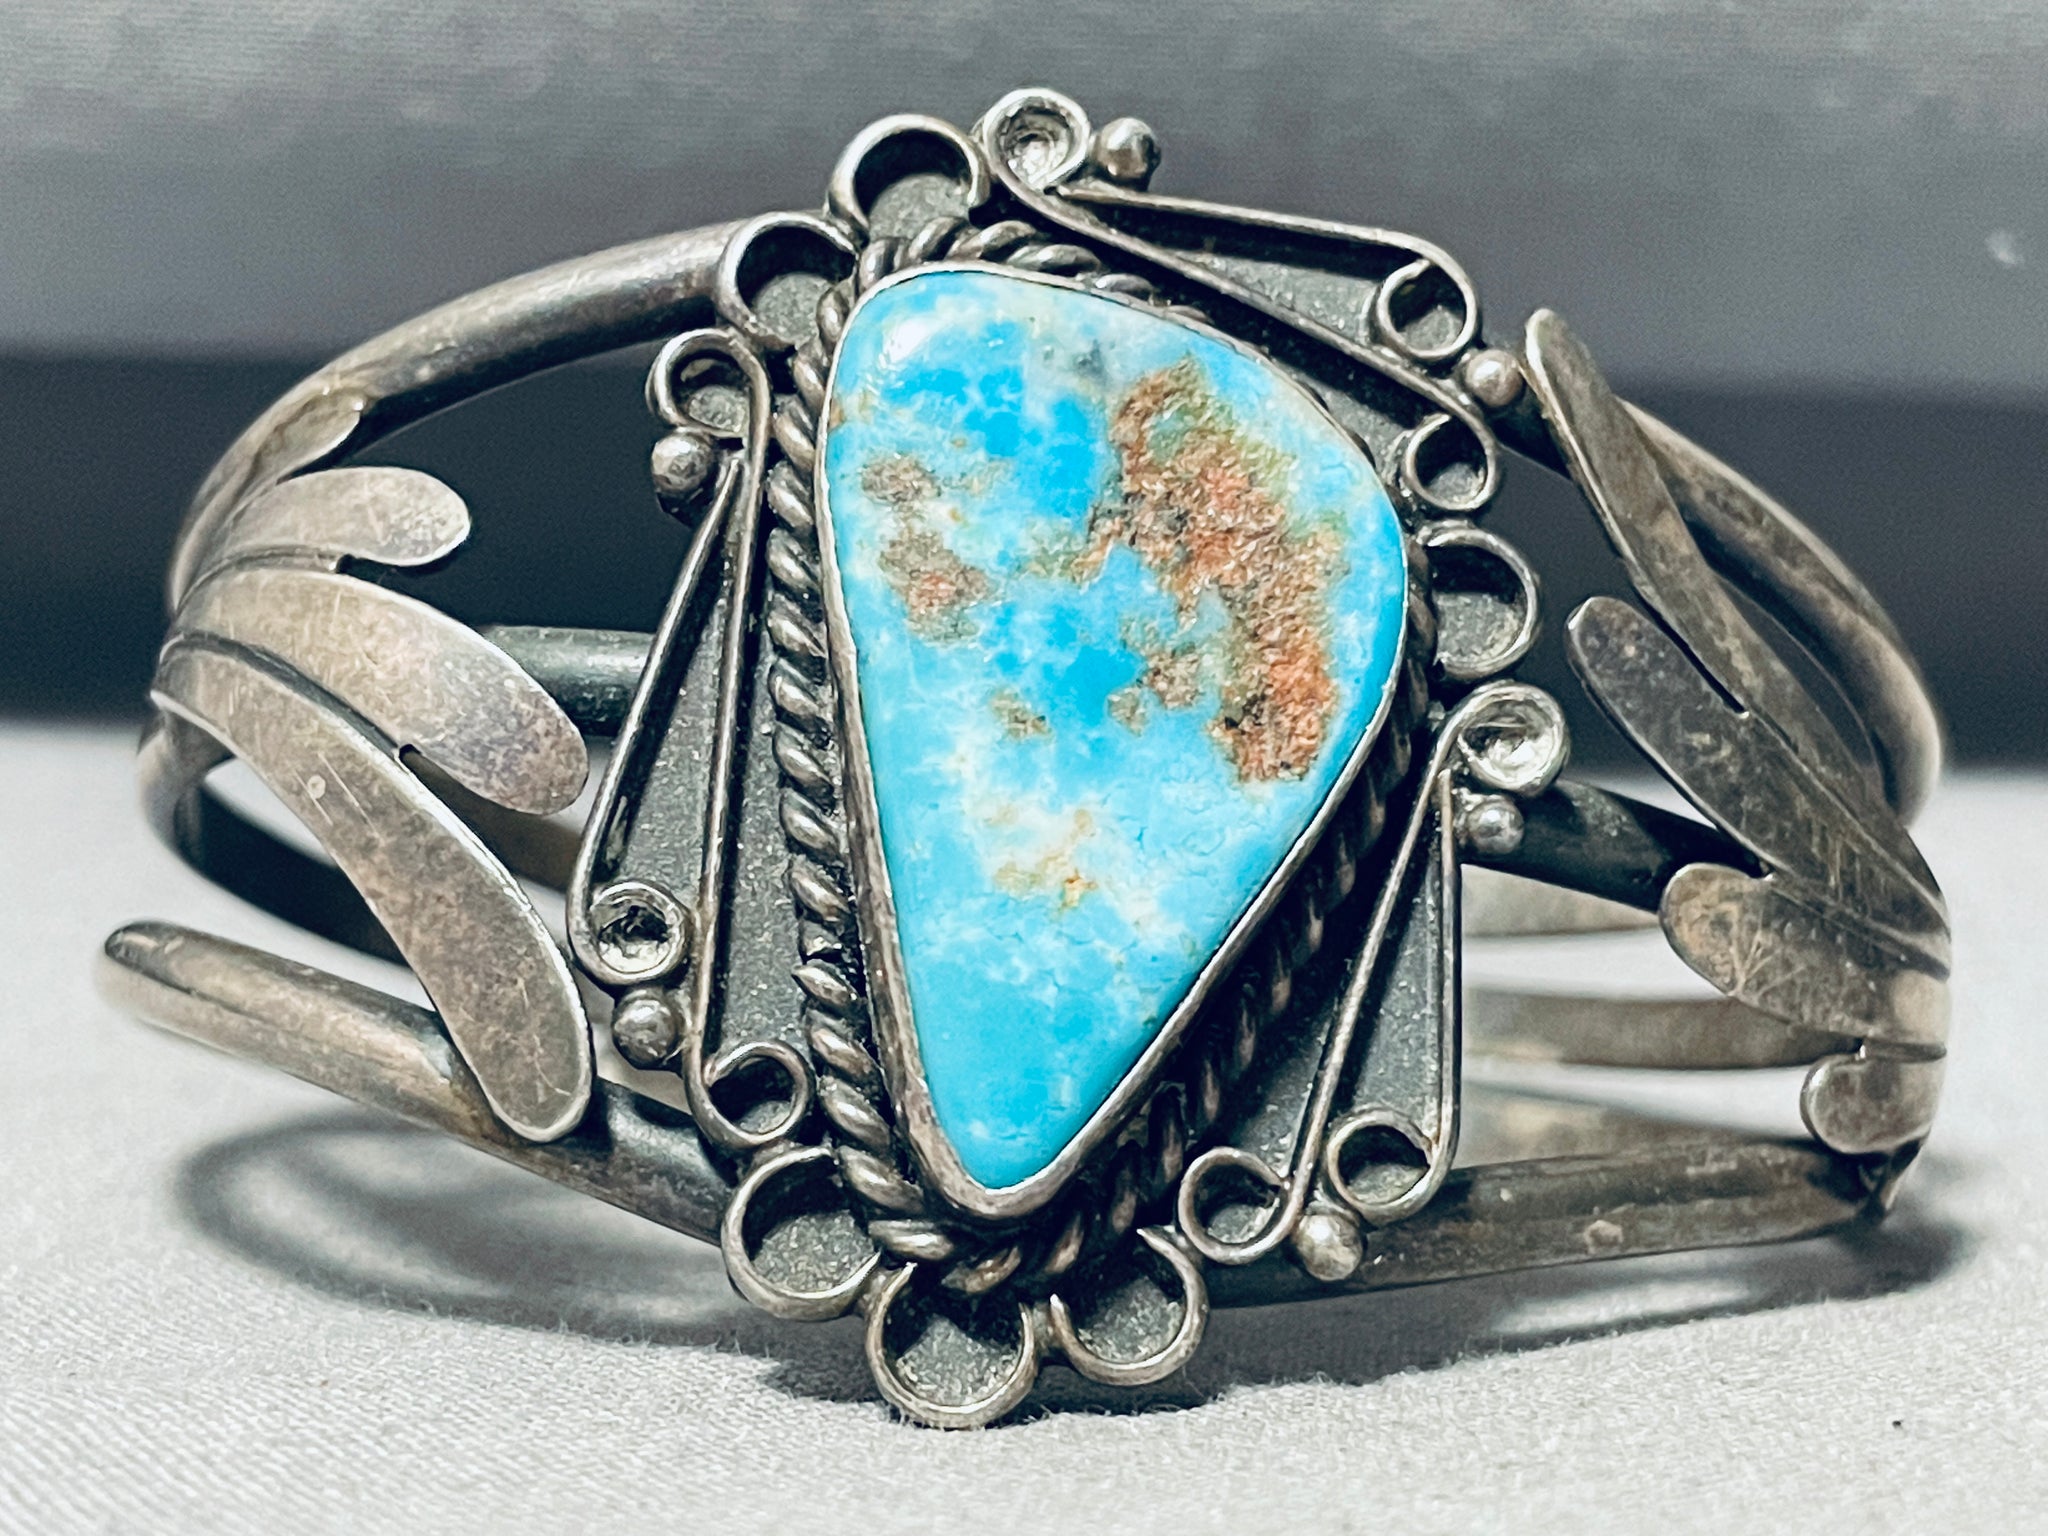 Vintage Navajo Sterling Silver Turquoise Stone Cuff Bracelet